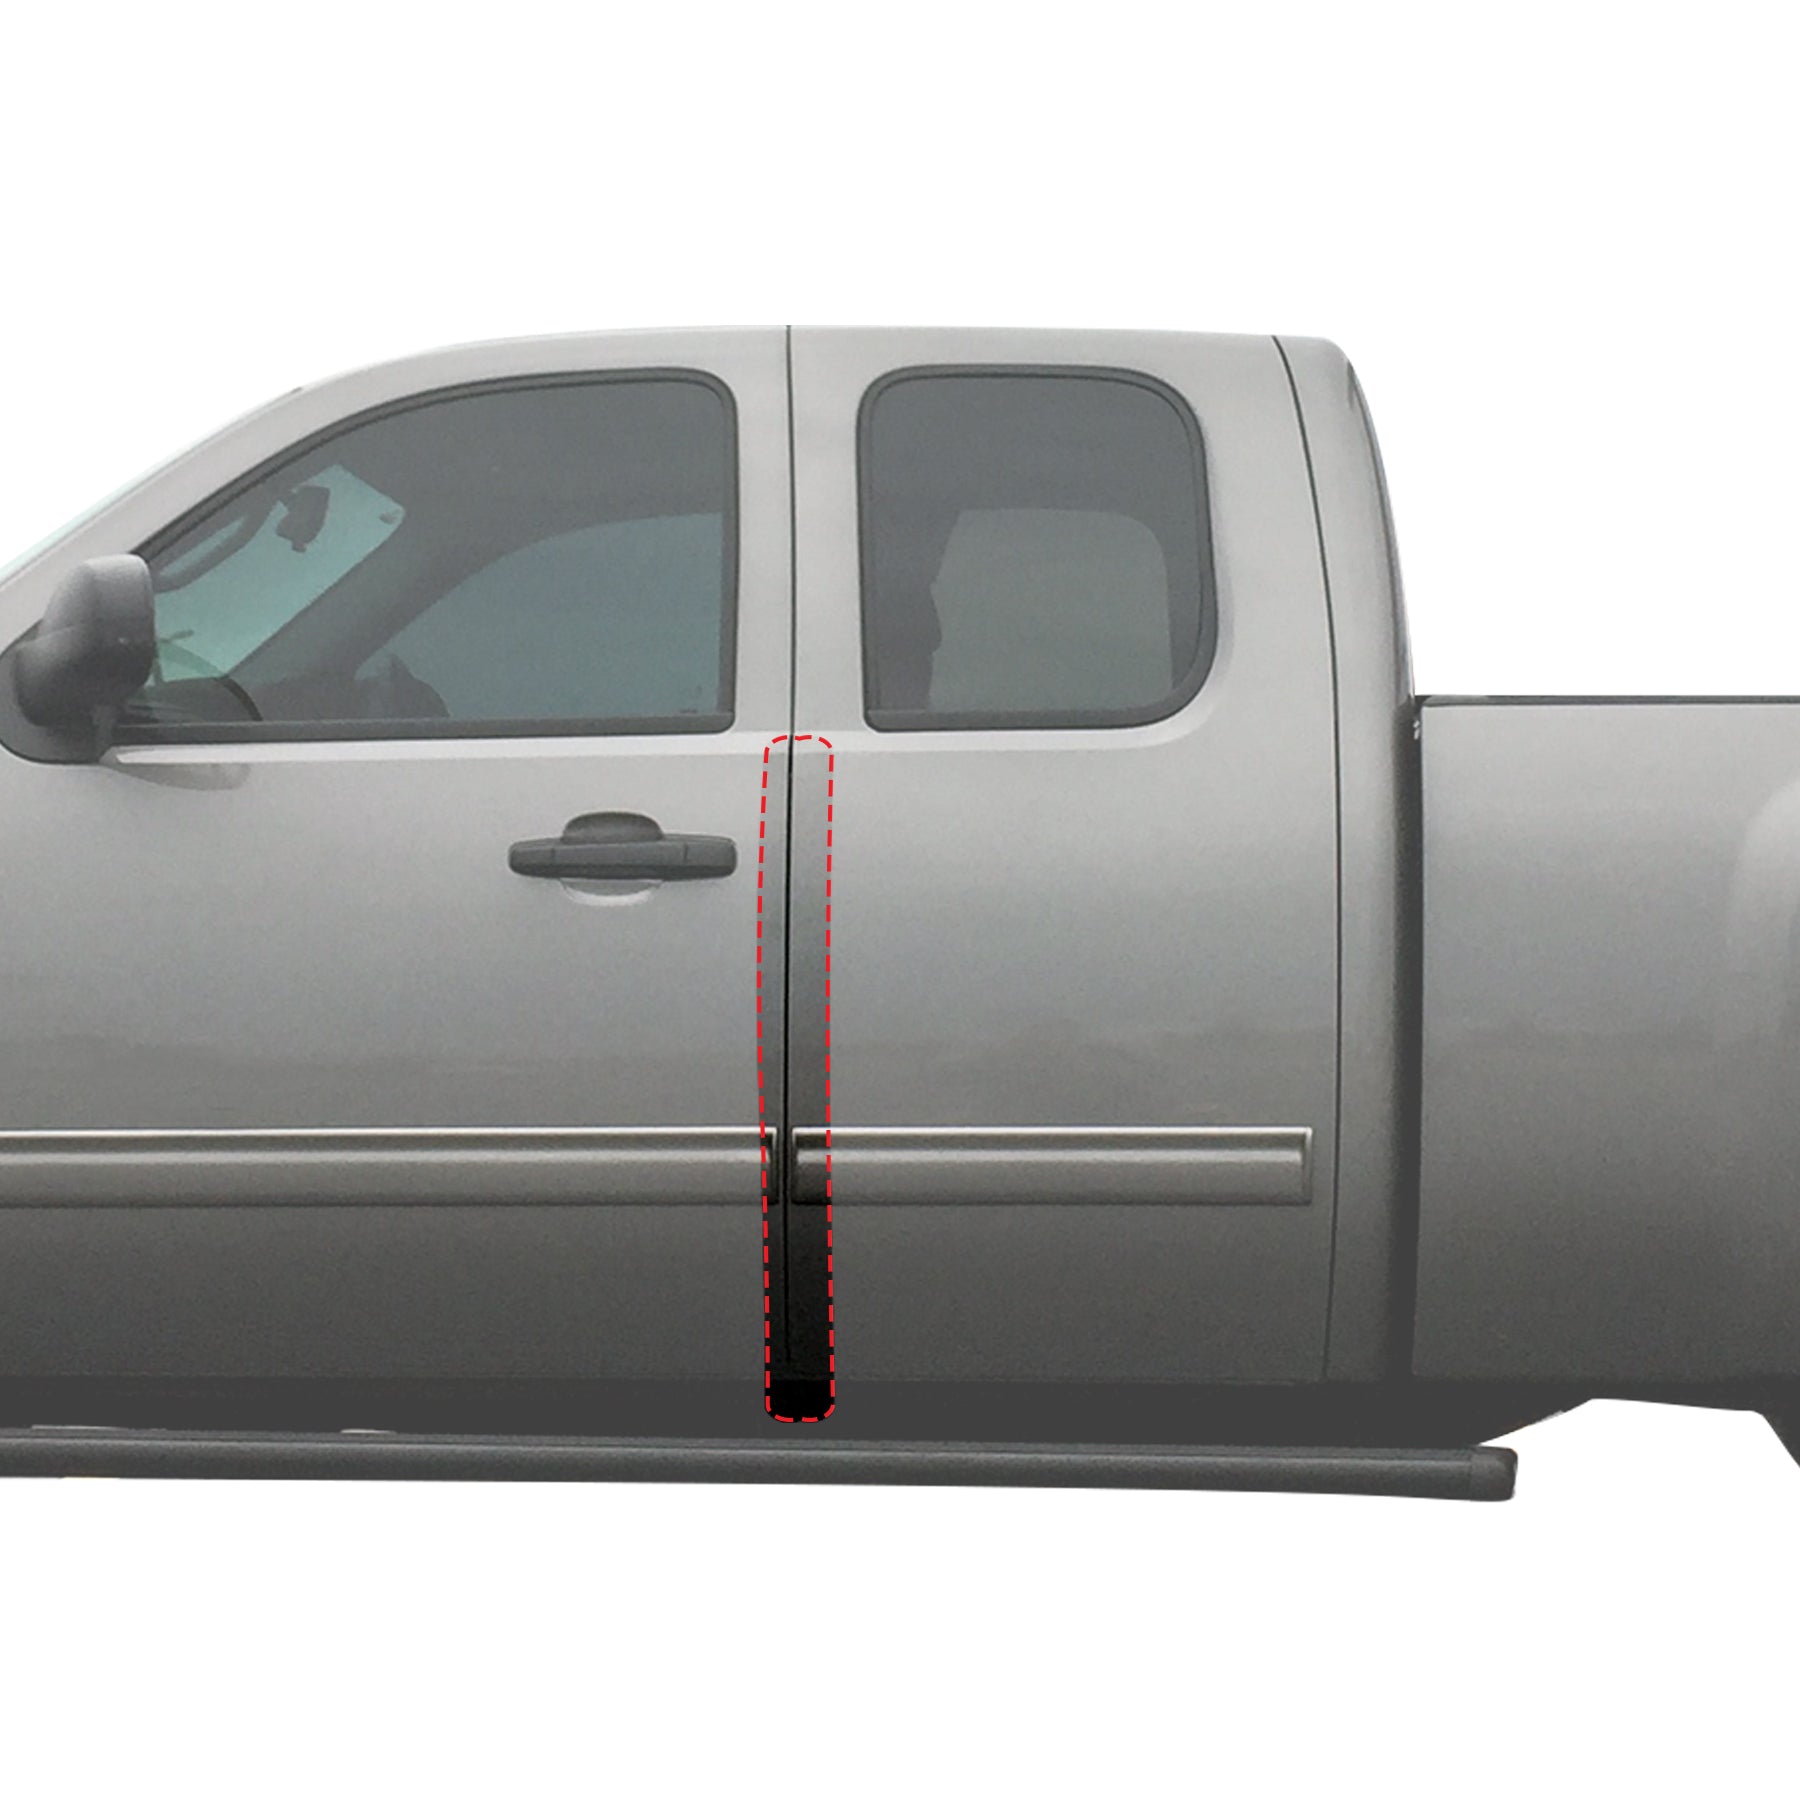 Red Hound Auto Door Edge Lip Guards 2007-2013 Compatible with Chevy GMC Silverado Sierra Extended Cab 4pc Door Lip Edge Clear Paint Protector Film Not Universal Pre-Cut Custom Fit